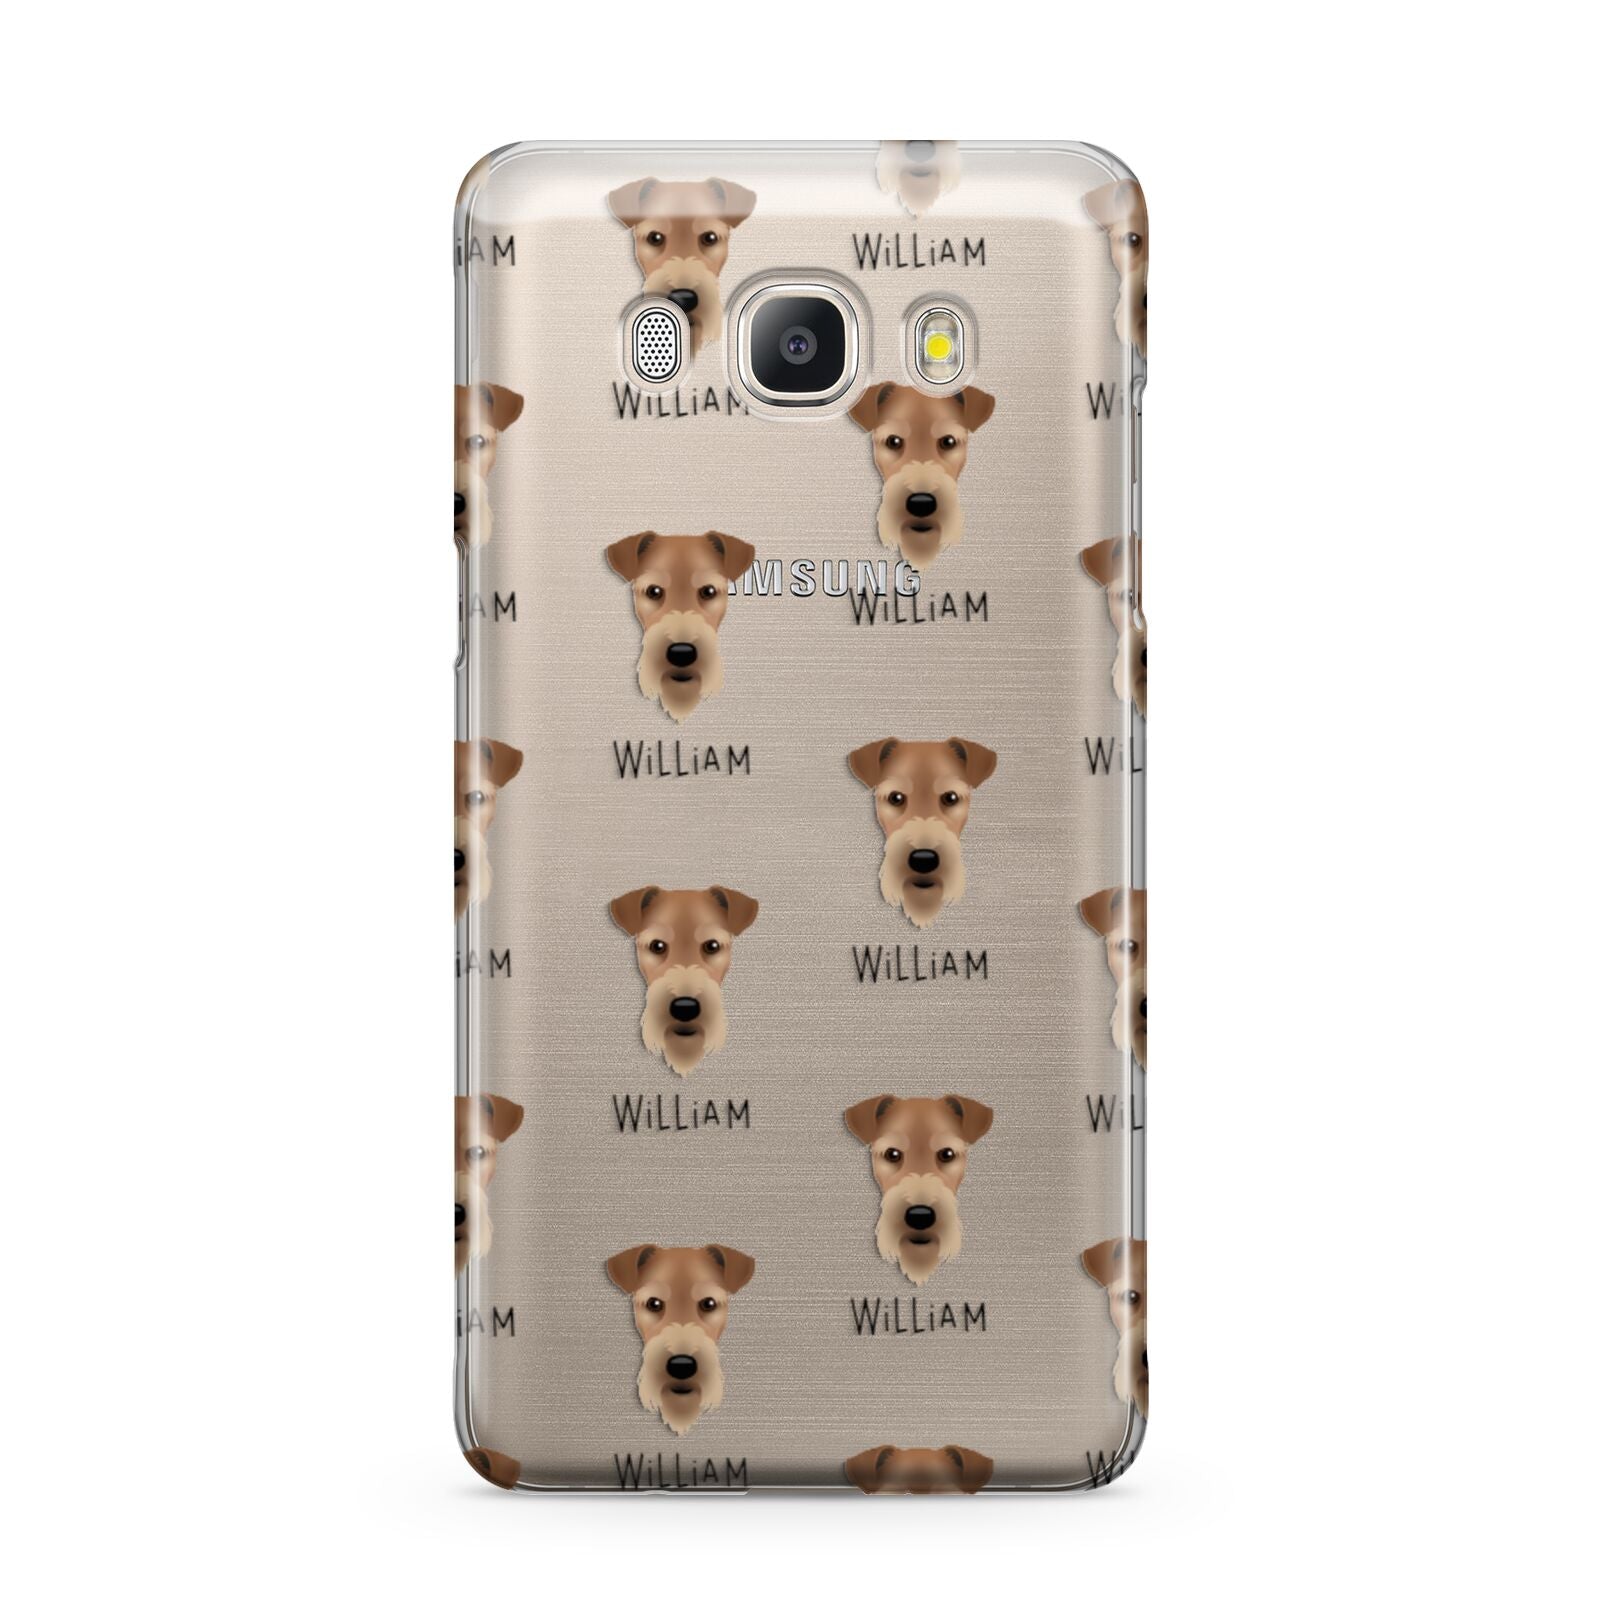 Airedale Terrier Icon with Name Samsung Galaxy J5 2016 Case